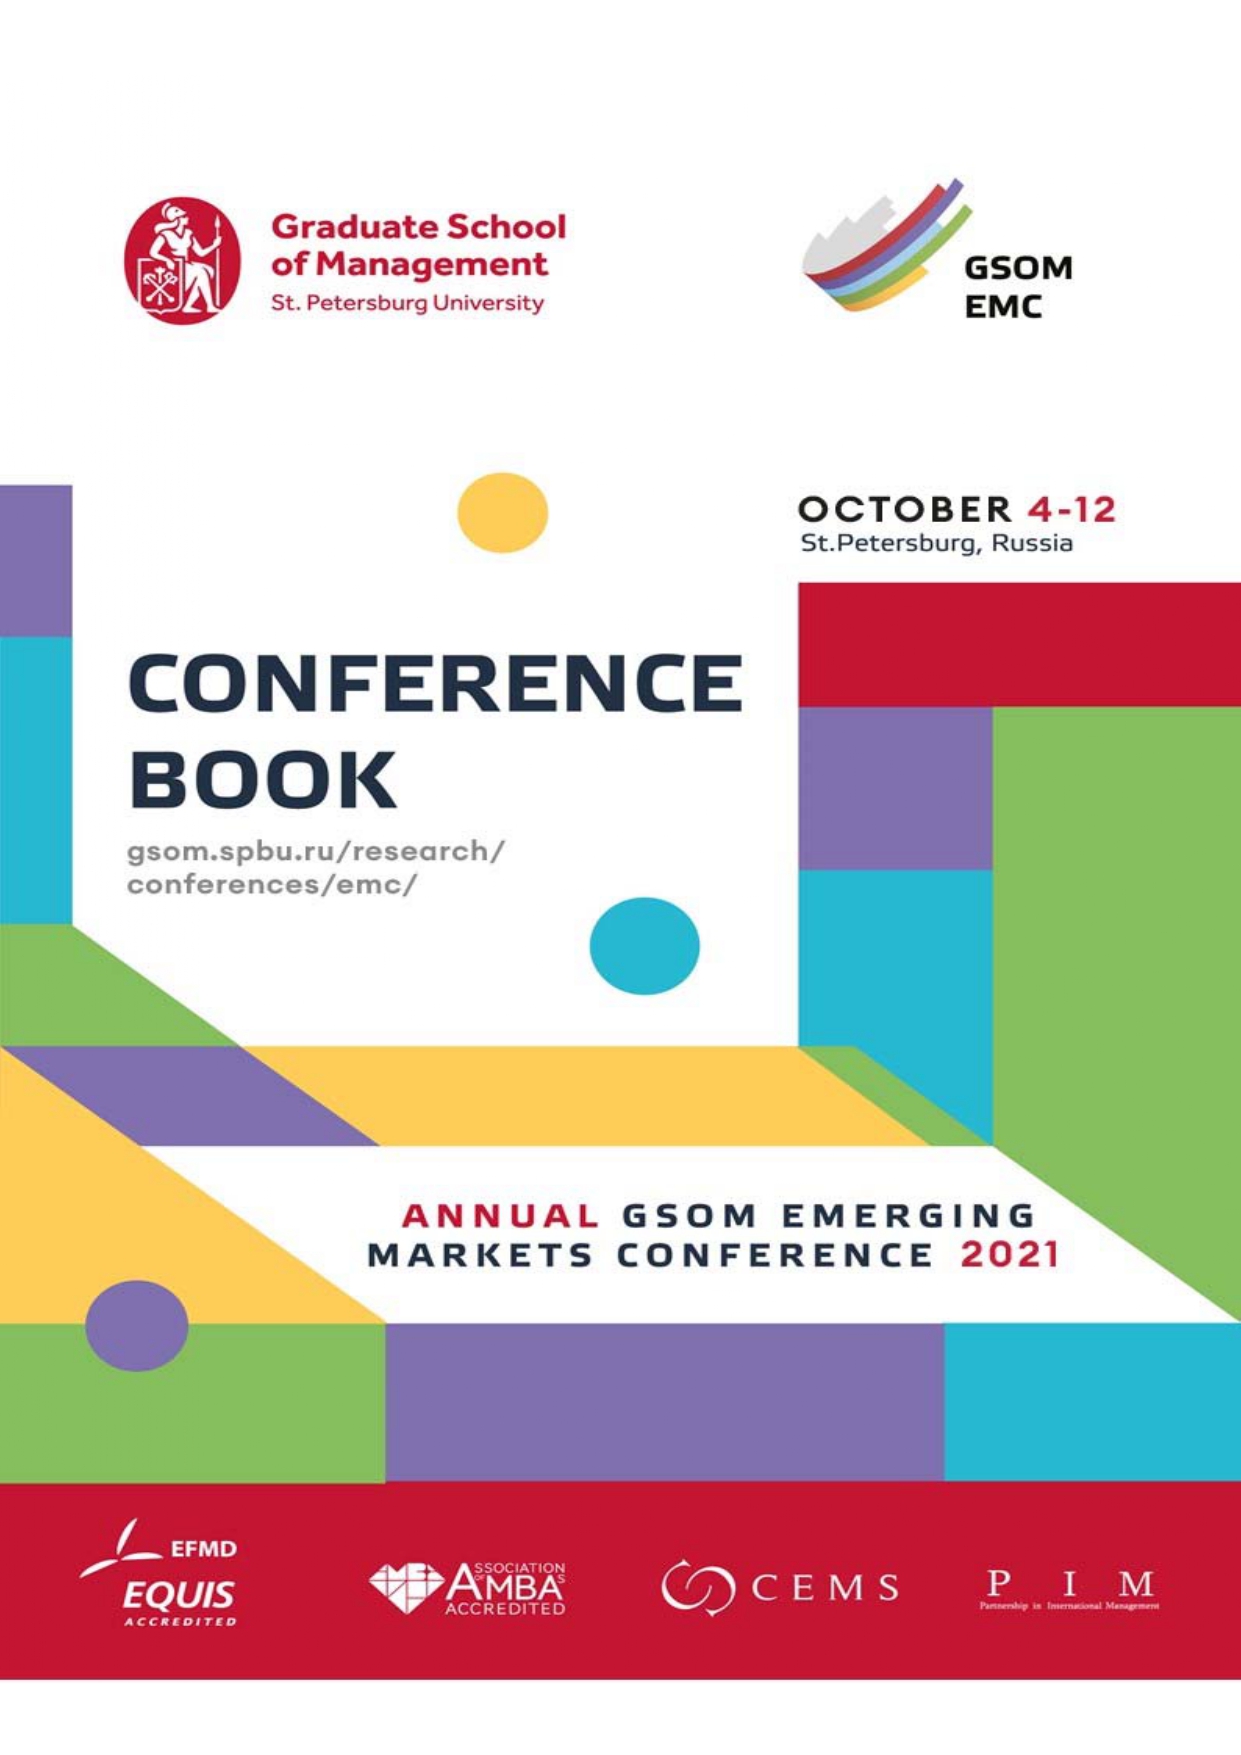 Annual GSOM Emerging Markets Conference 2021. Conference book